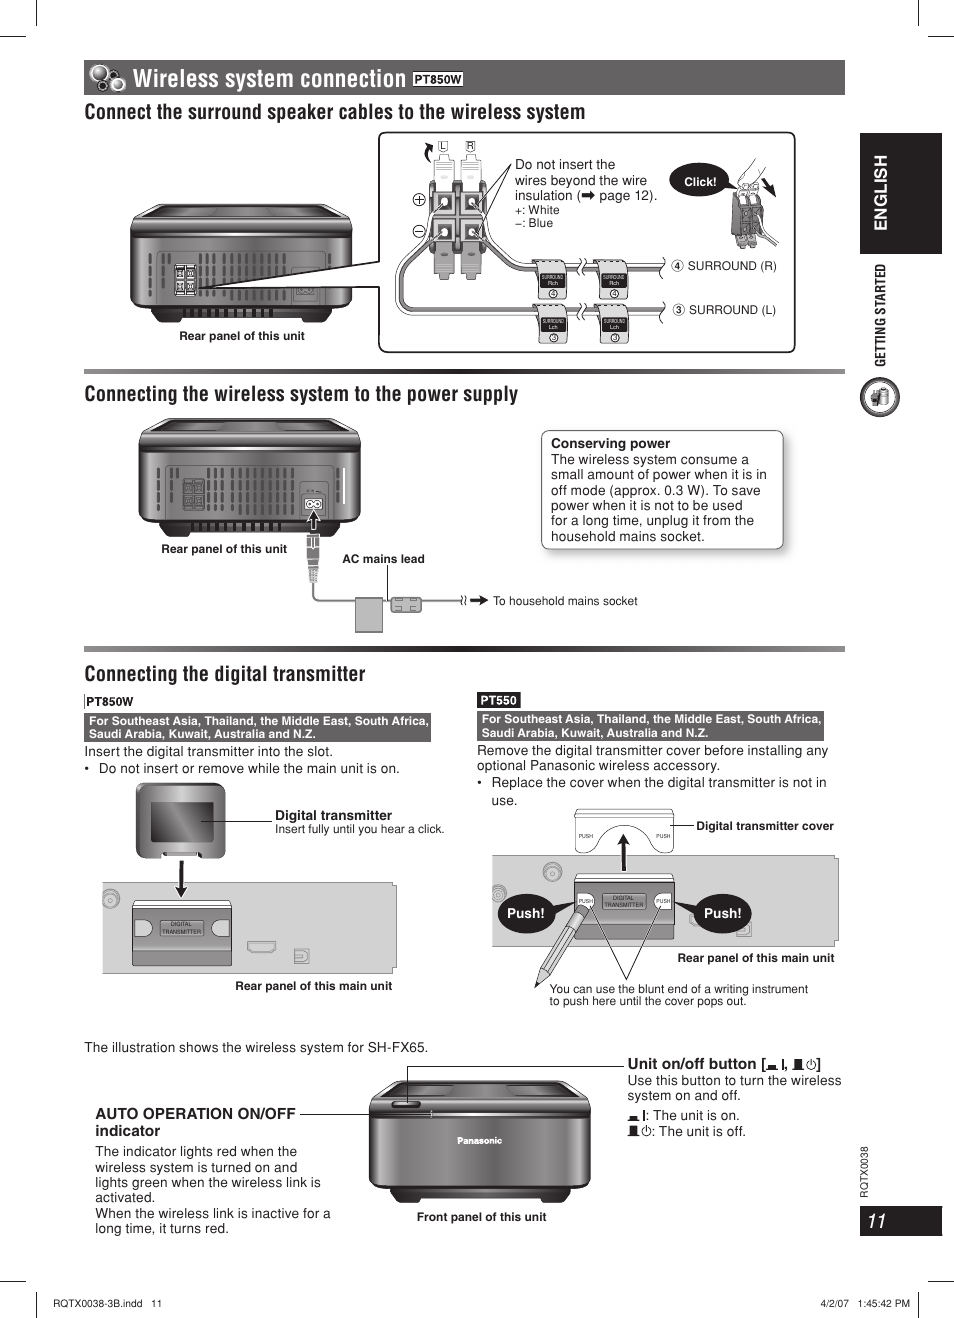 Wireless system connection, English, Auto operation on/off indicator | Panasonic  SC-PT850 User Manual | Page 11 / 48 | Original mode